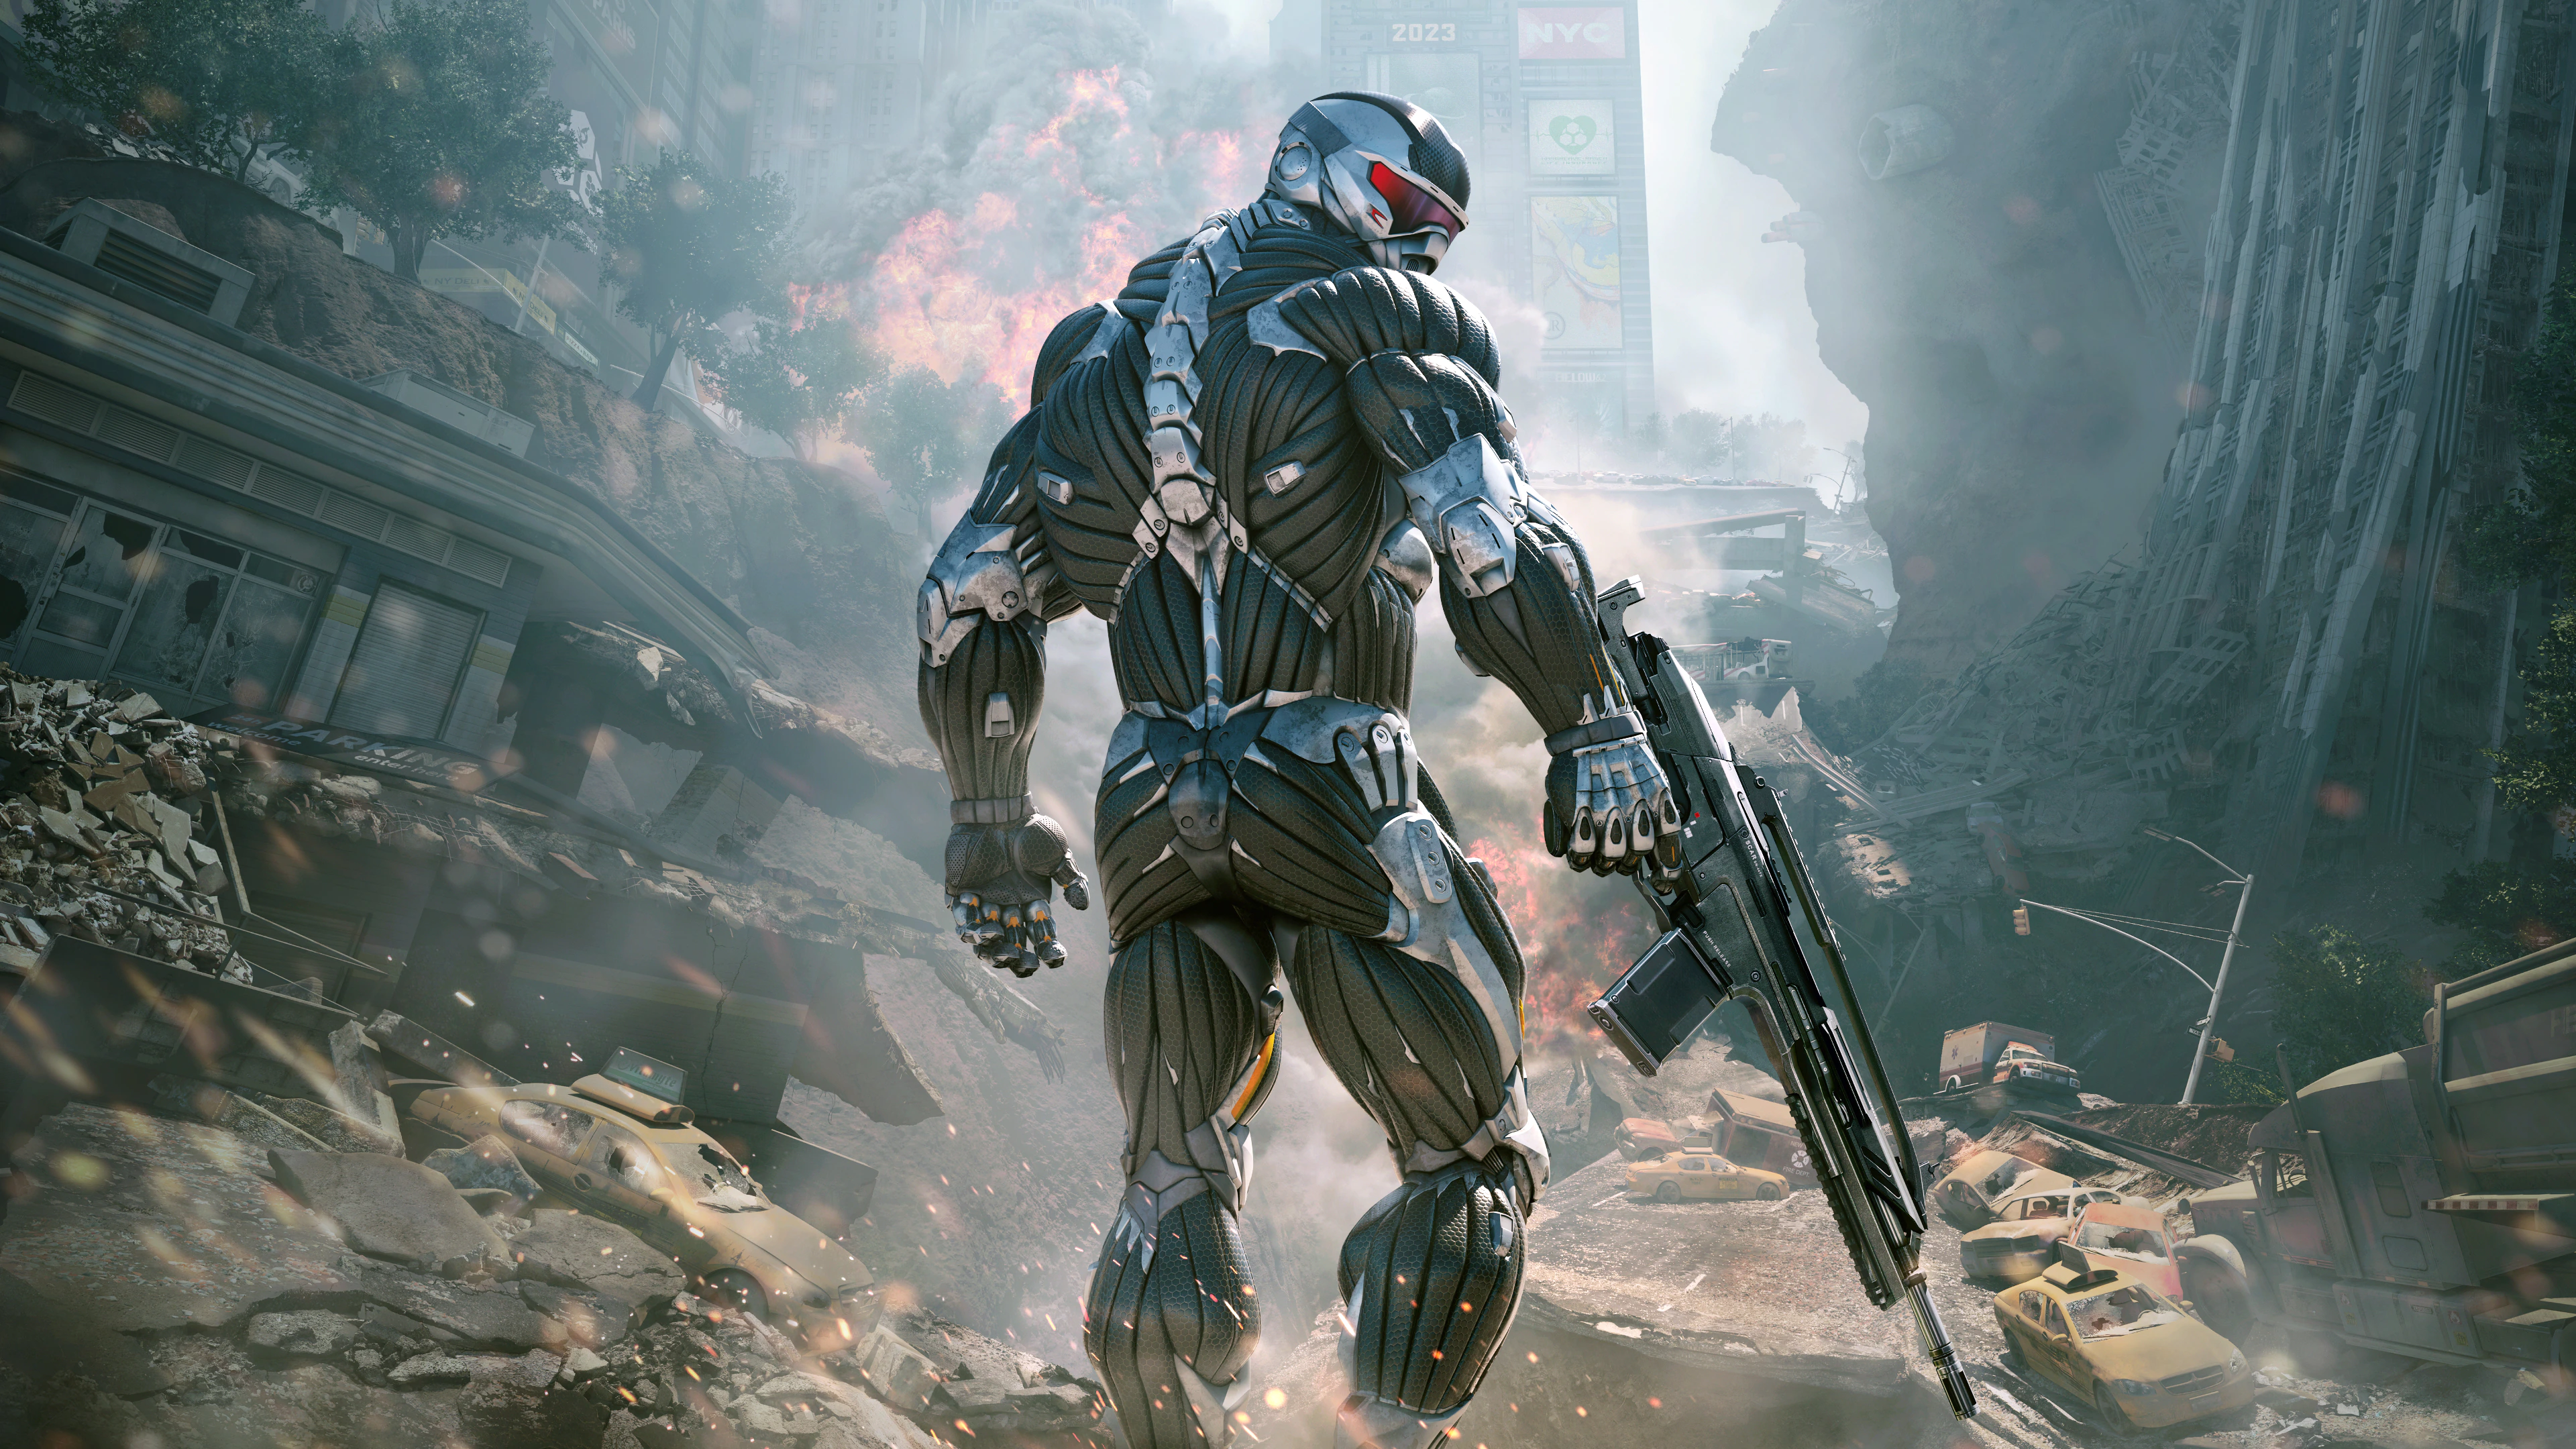 Crysis Remastered Trilogiam accipit October release date